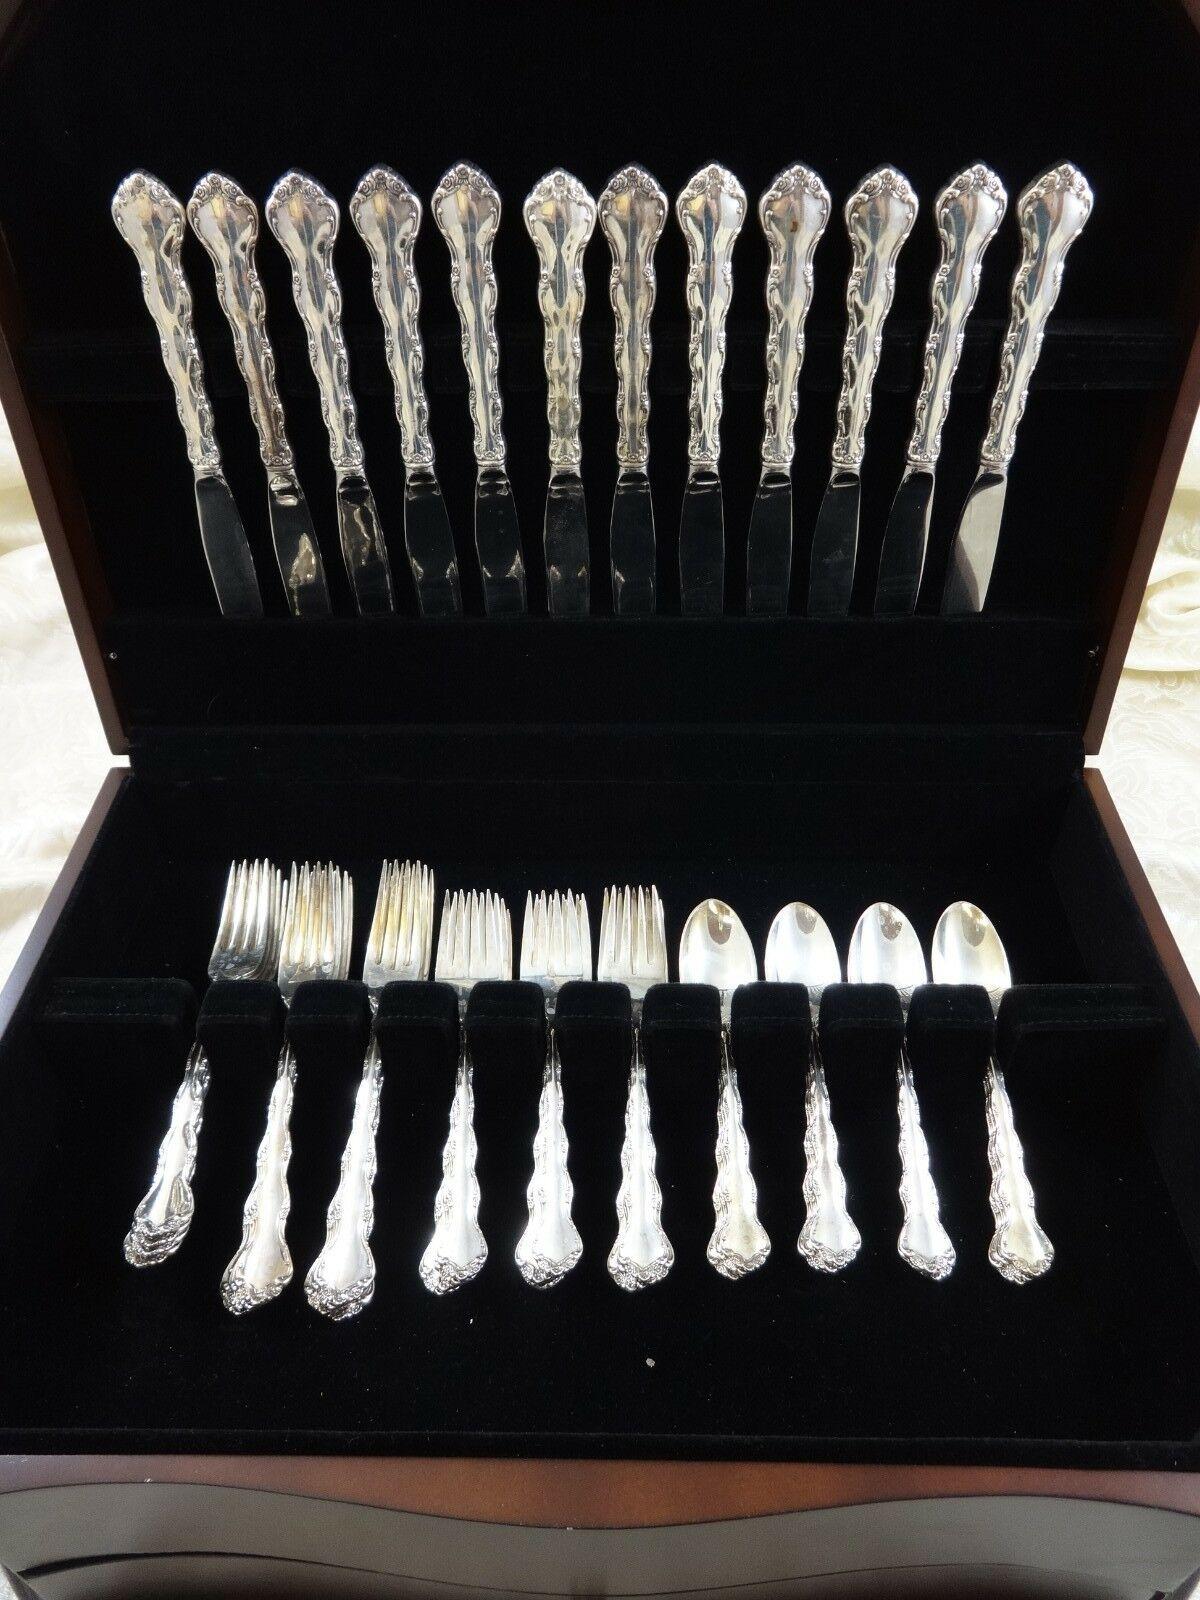 Beautiful Tara by Reed & Barton sterling silver flatware set - 57 pieces. This set includes:
  
12 knives, 9